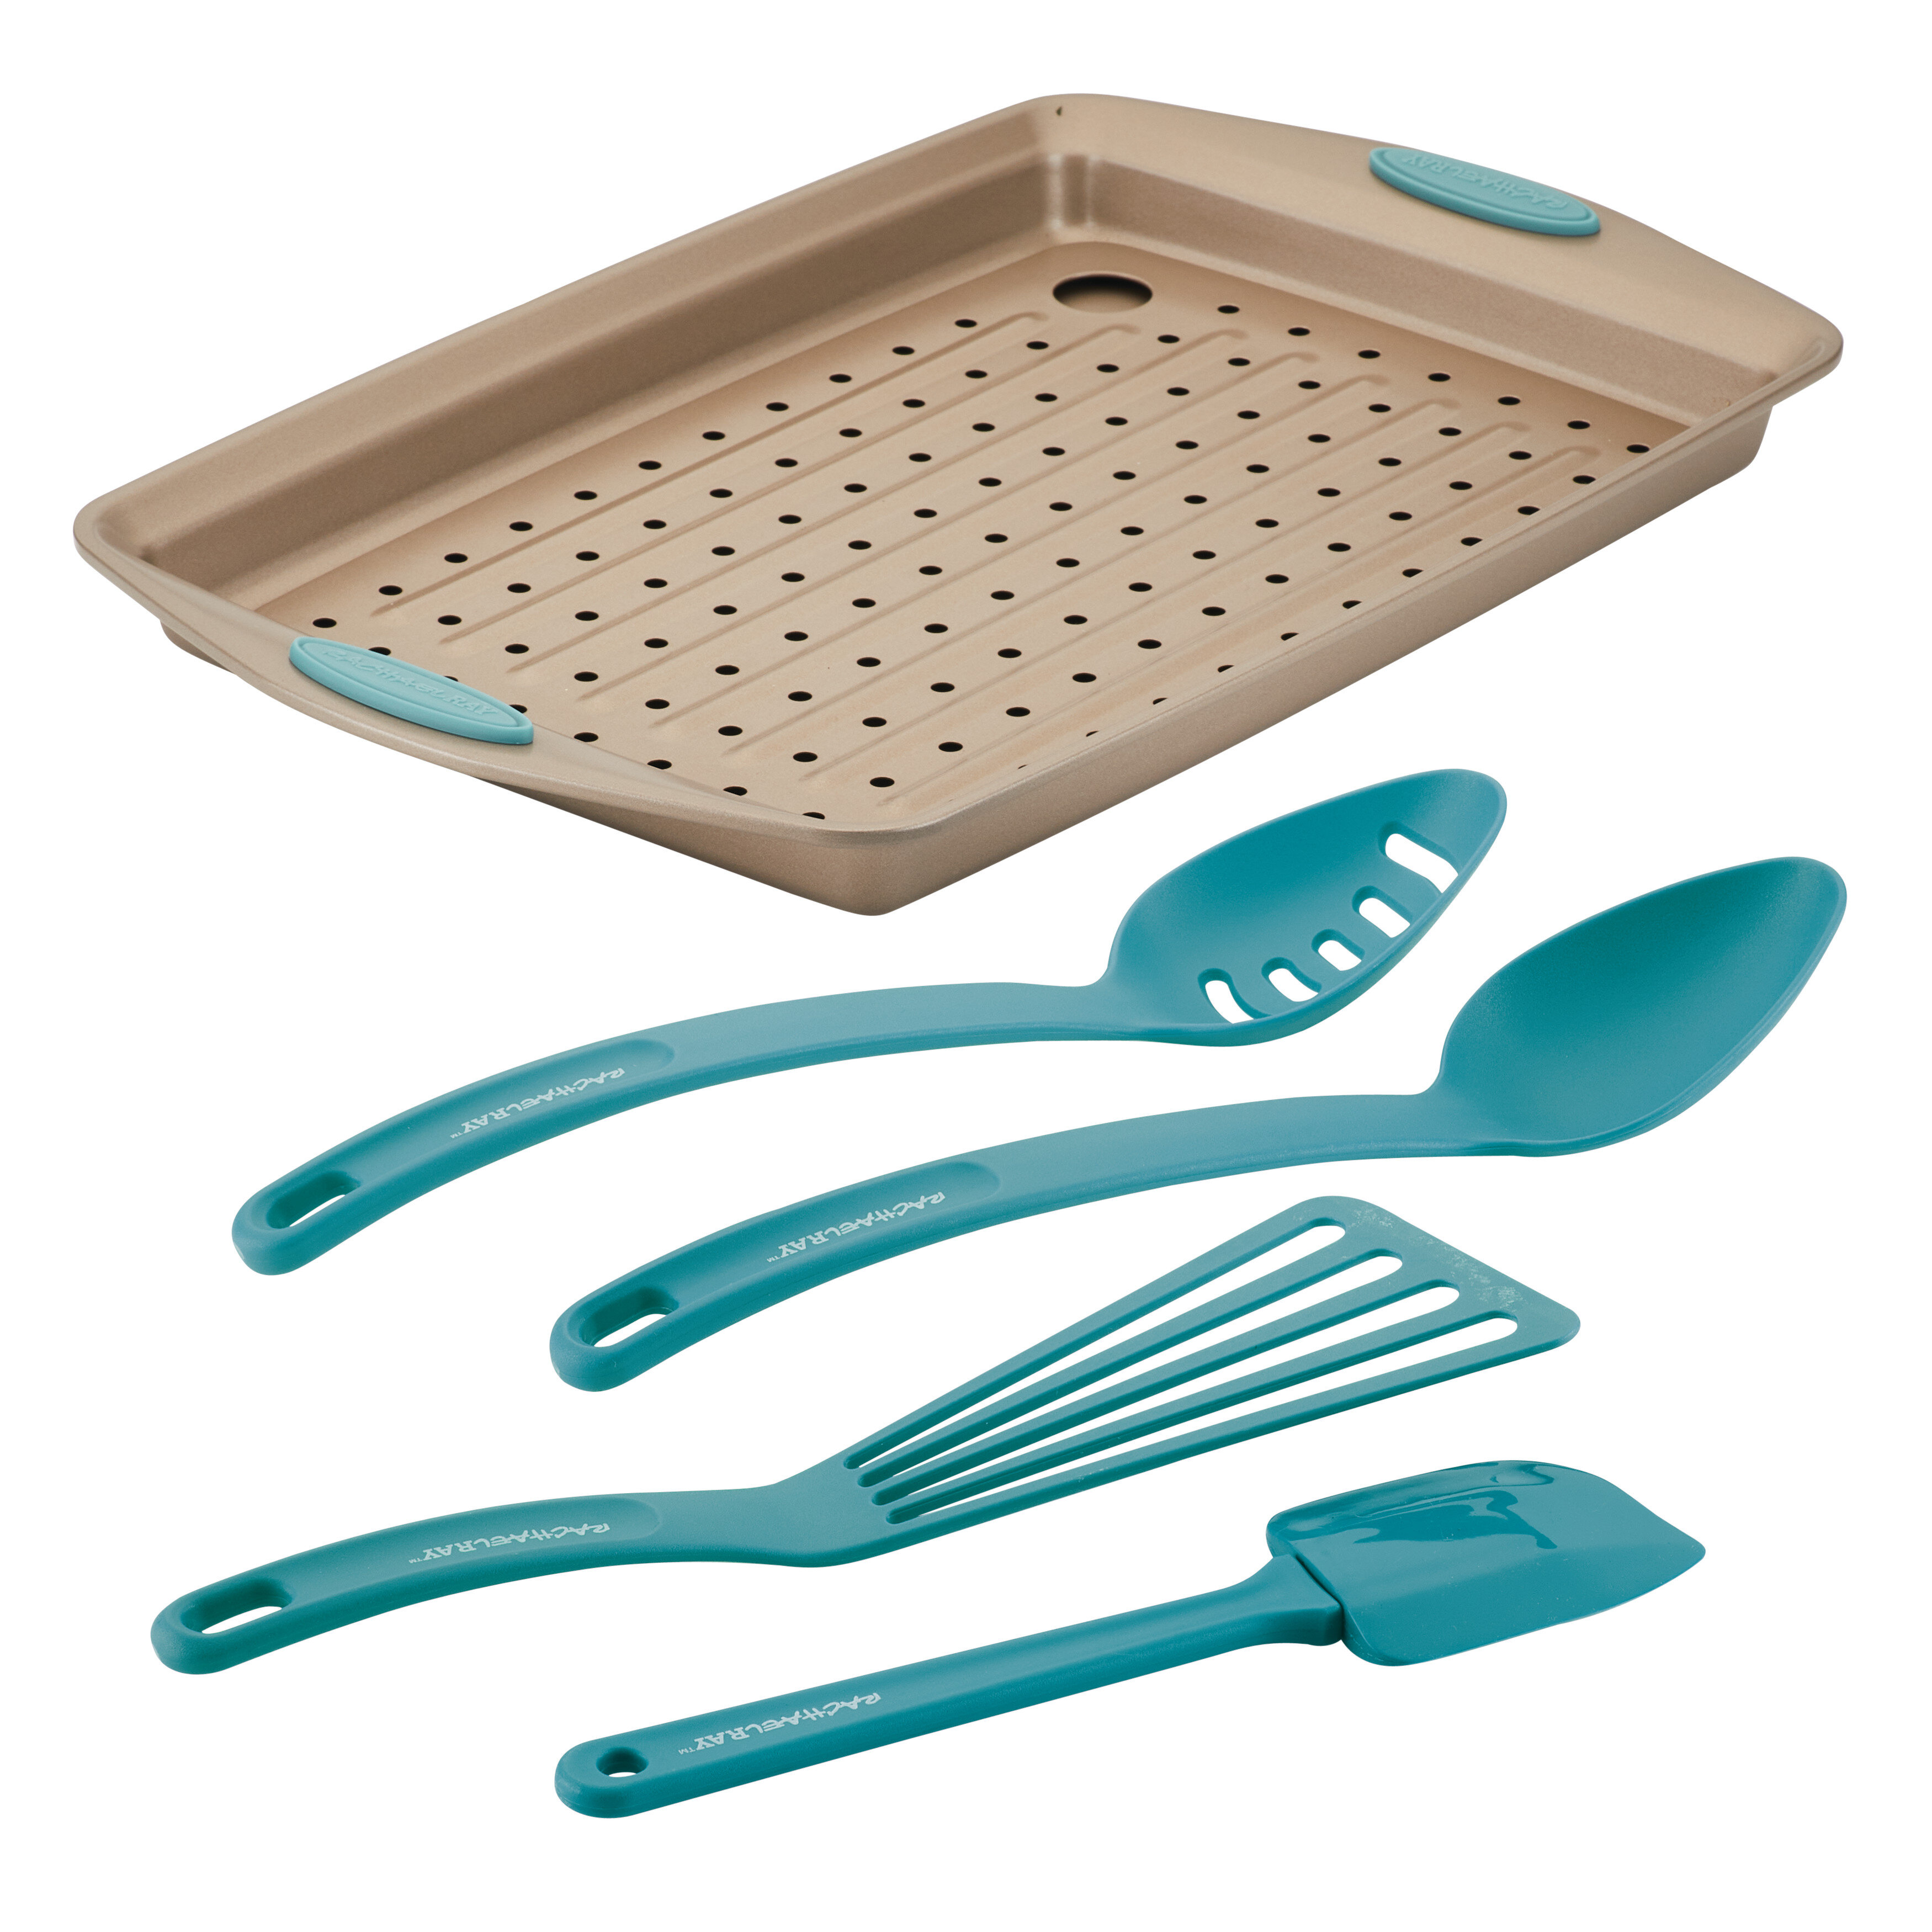 Teal Kitchen Utensils Set with Holder - 17PC Teal & Gold Cooking